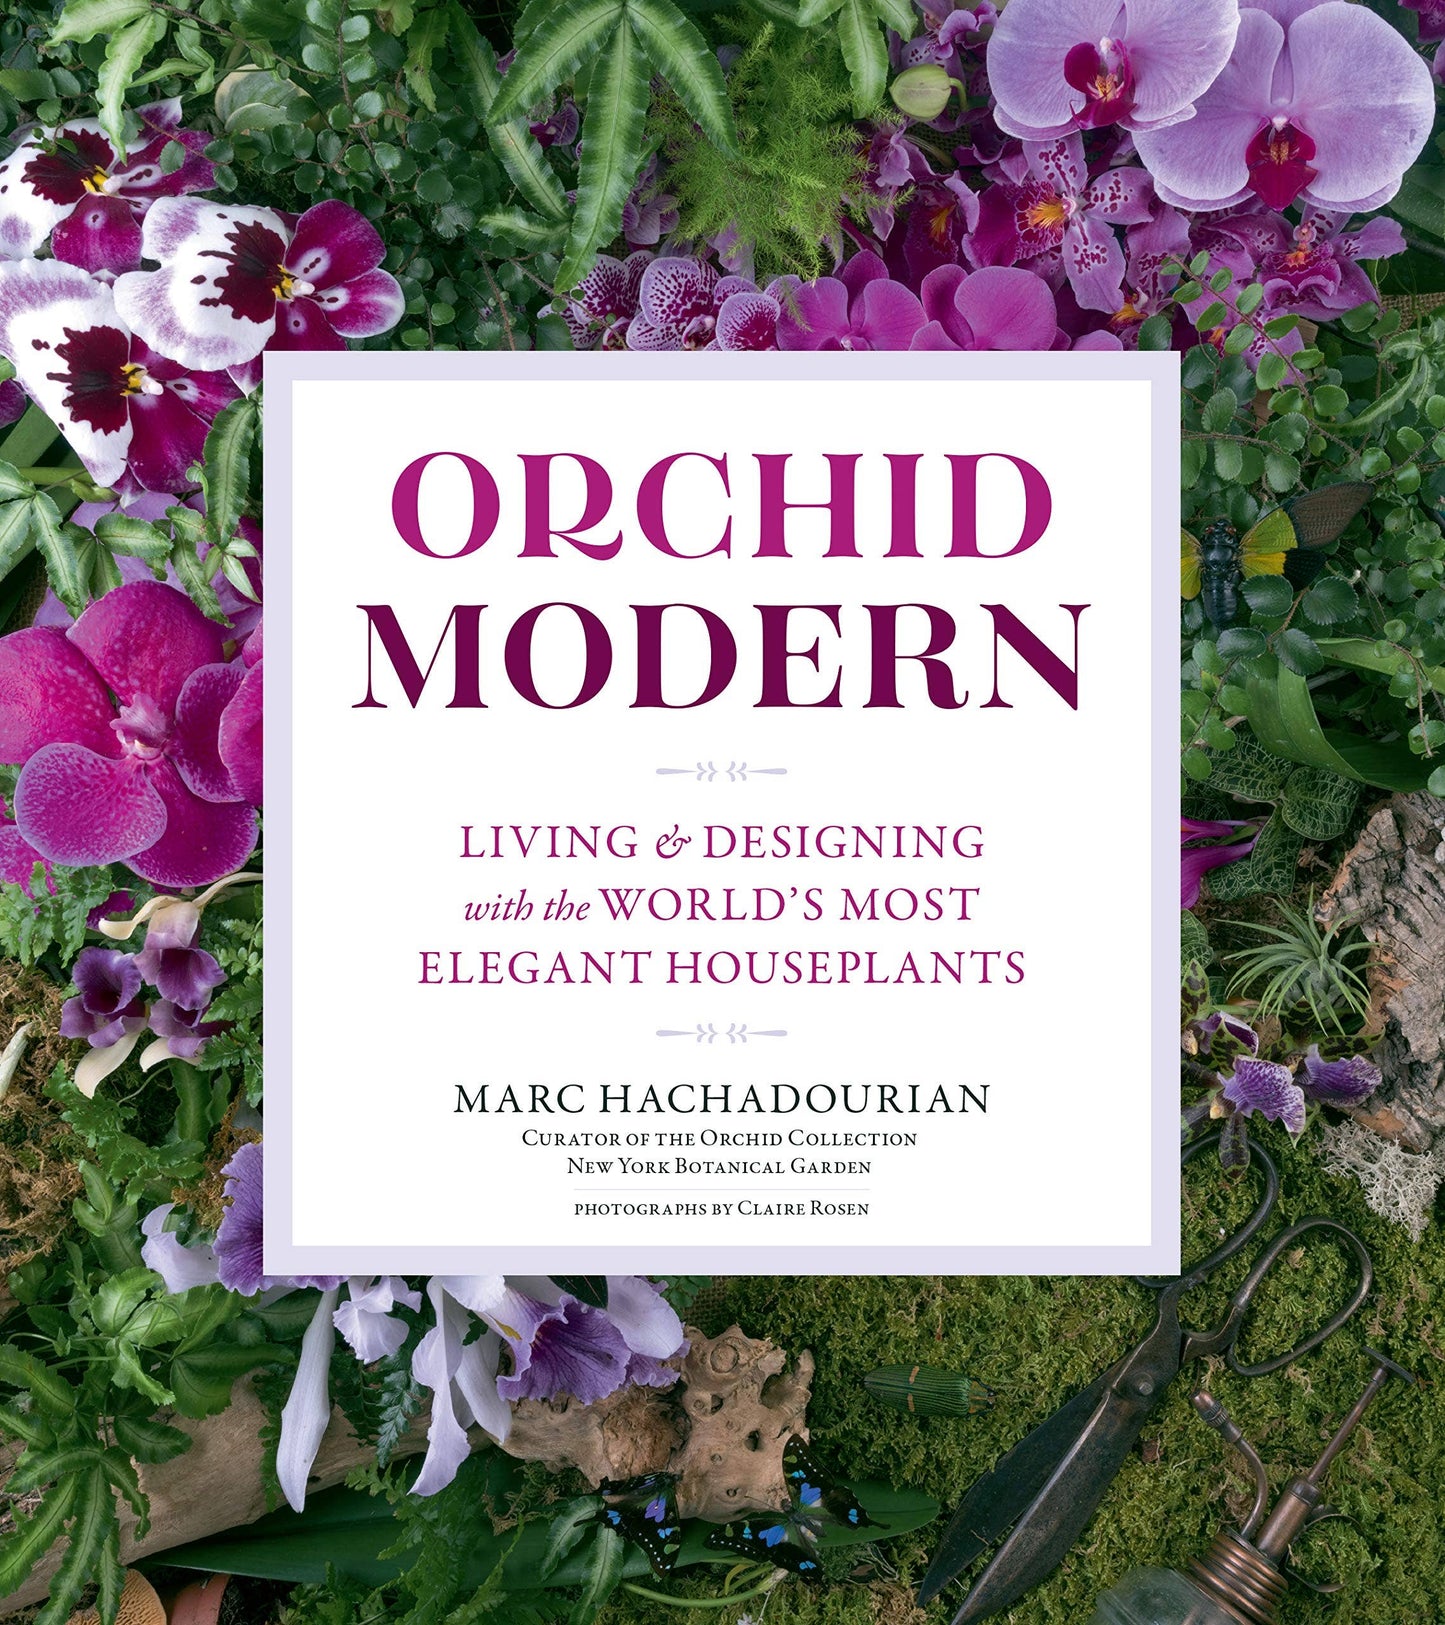 Orchid Modern: Living and Designing with Elegant Houseplants